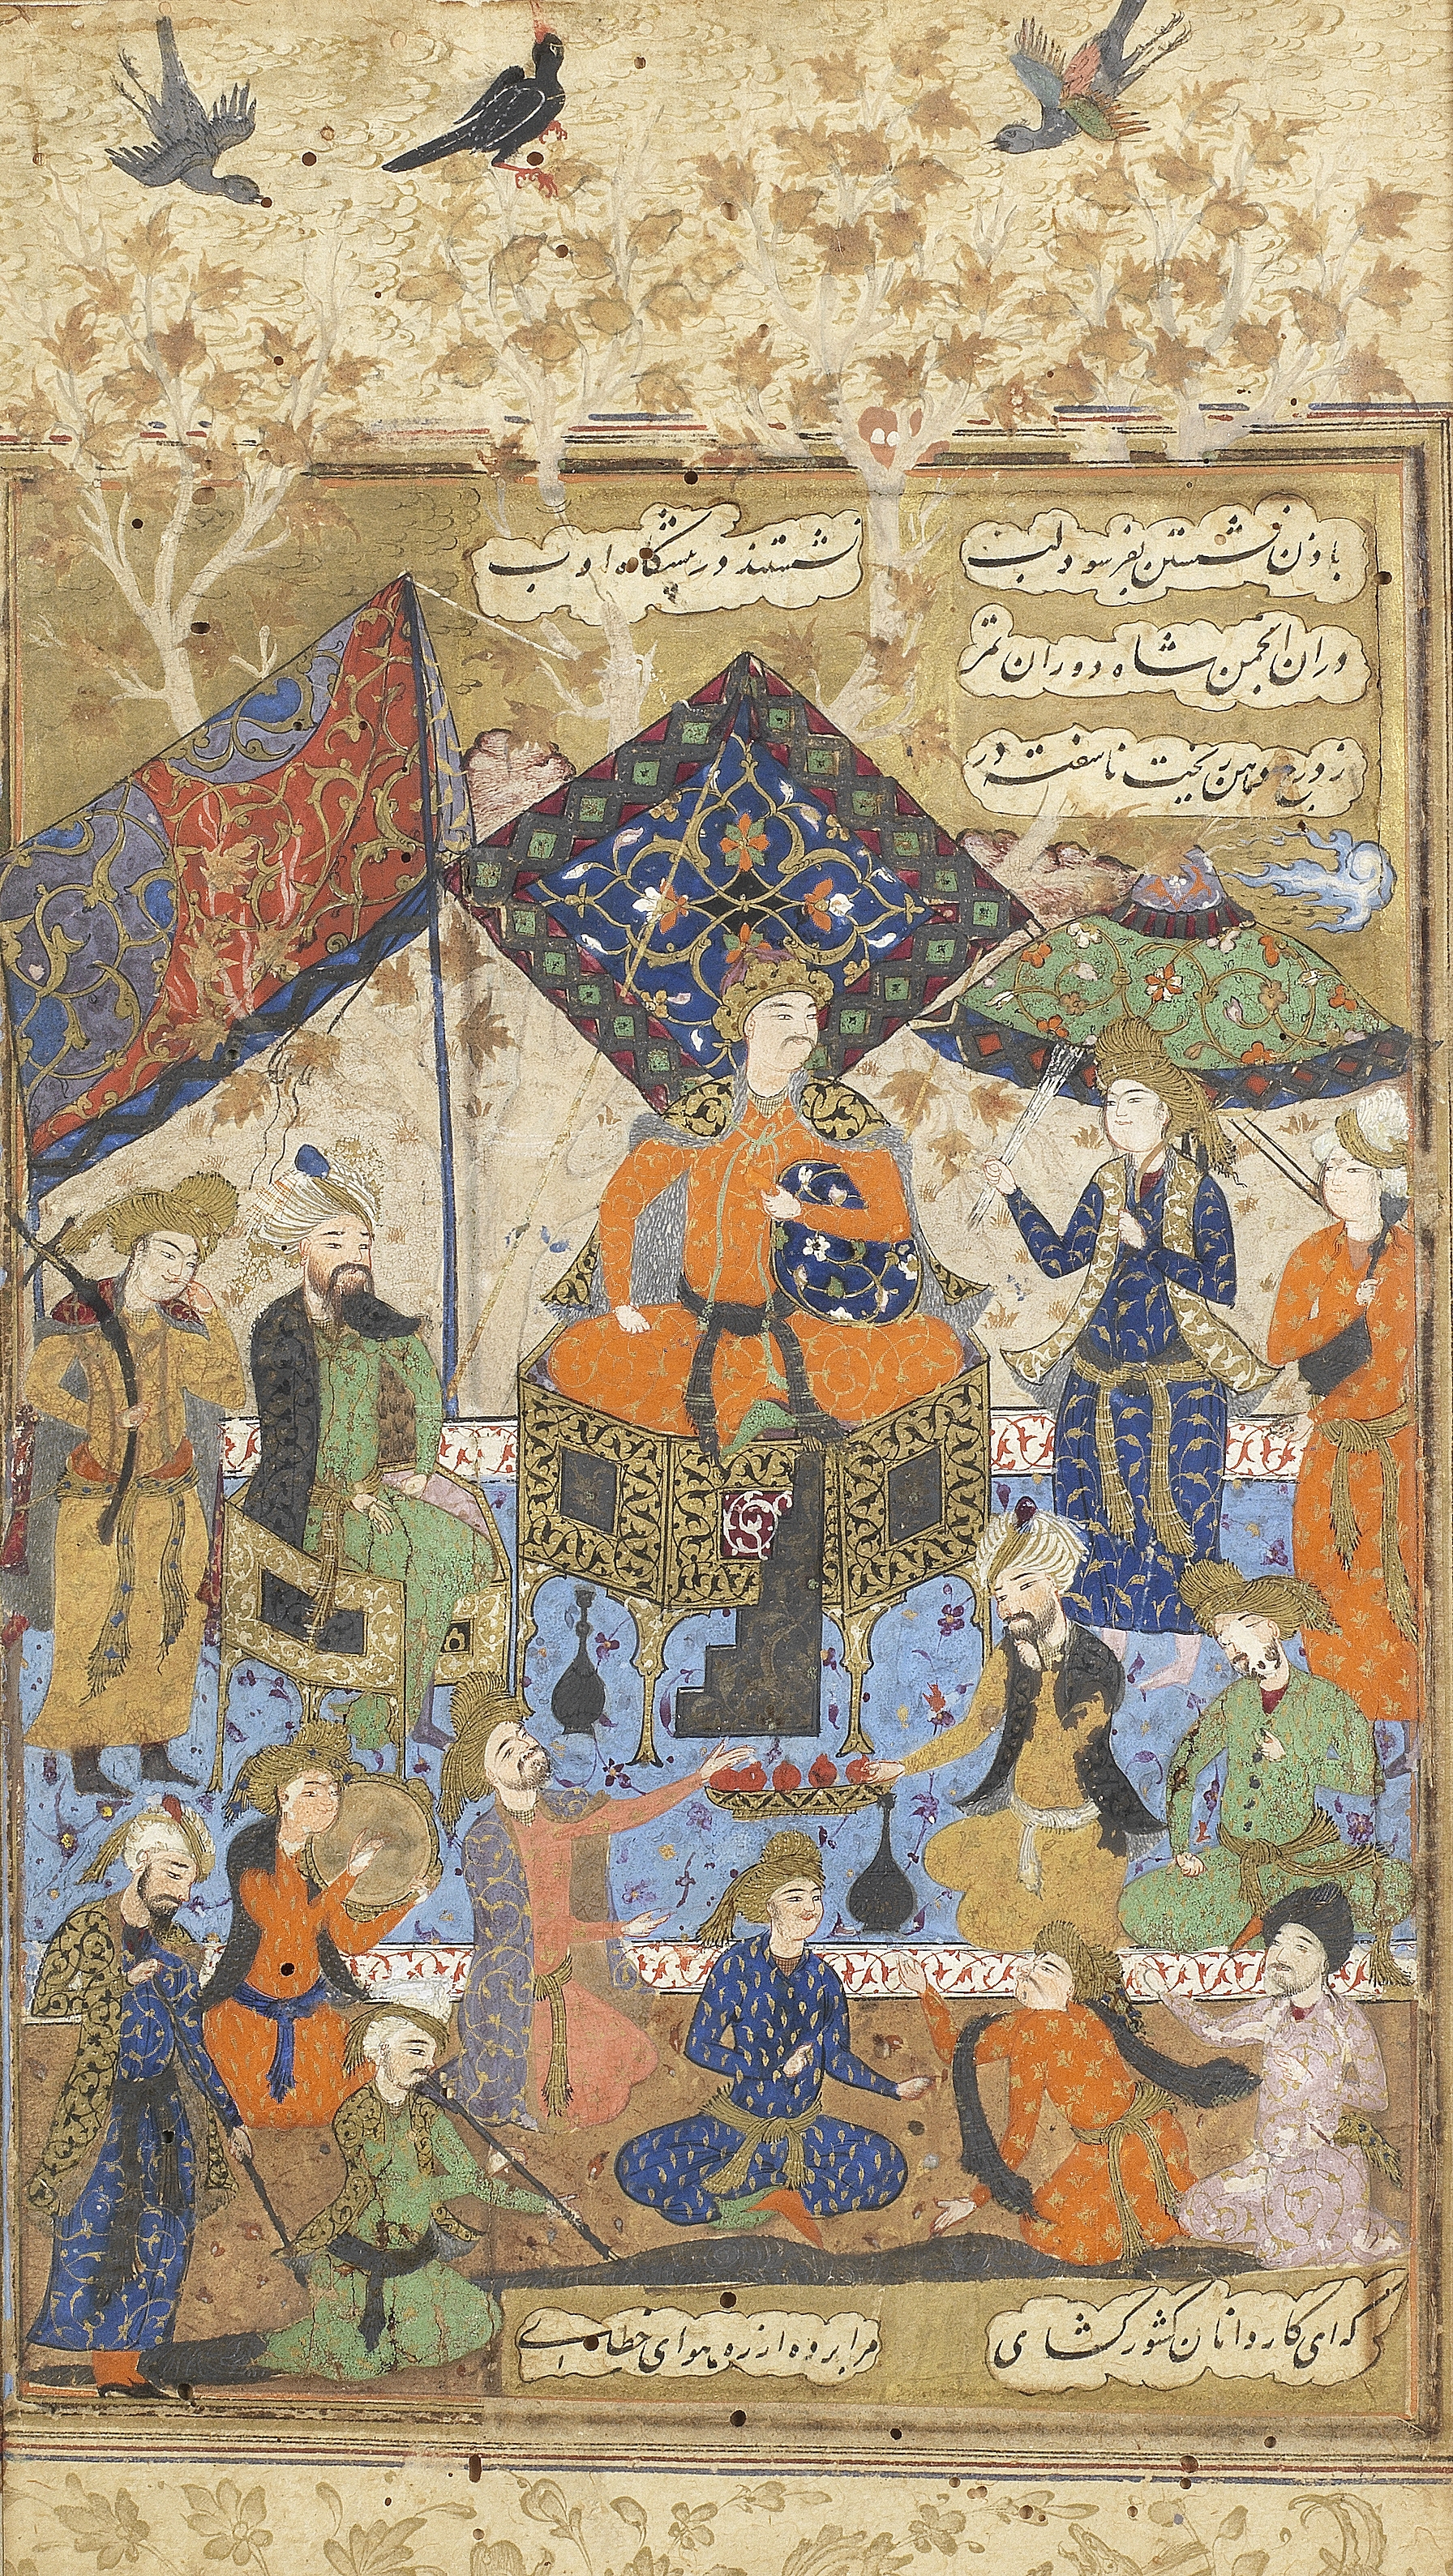 A leaf from an illustrated manuscript, depicting an enthroned ruler with courtiers Persia, 16th C...